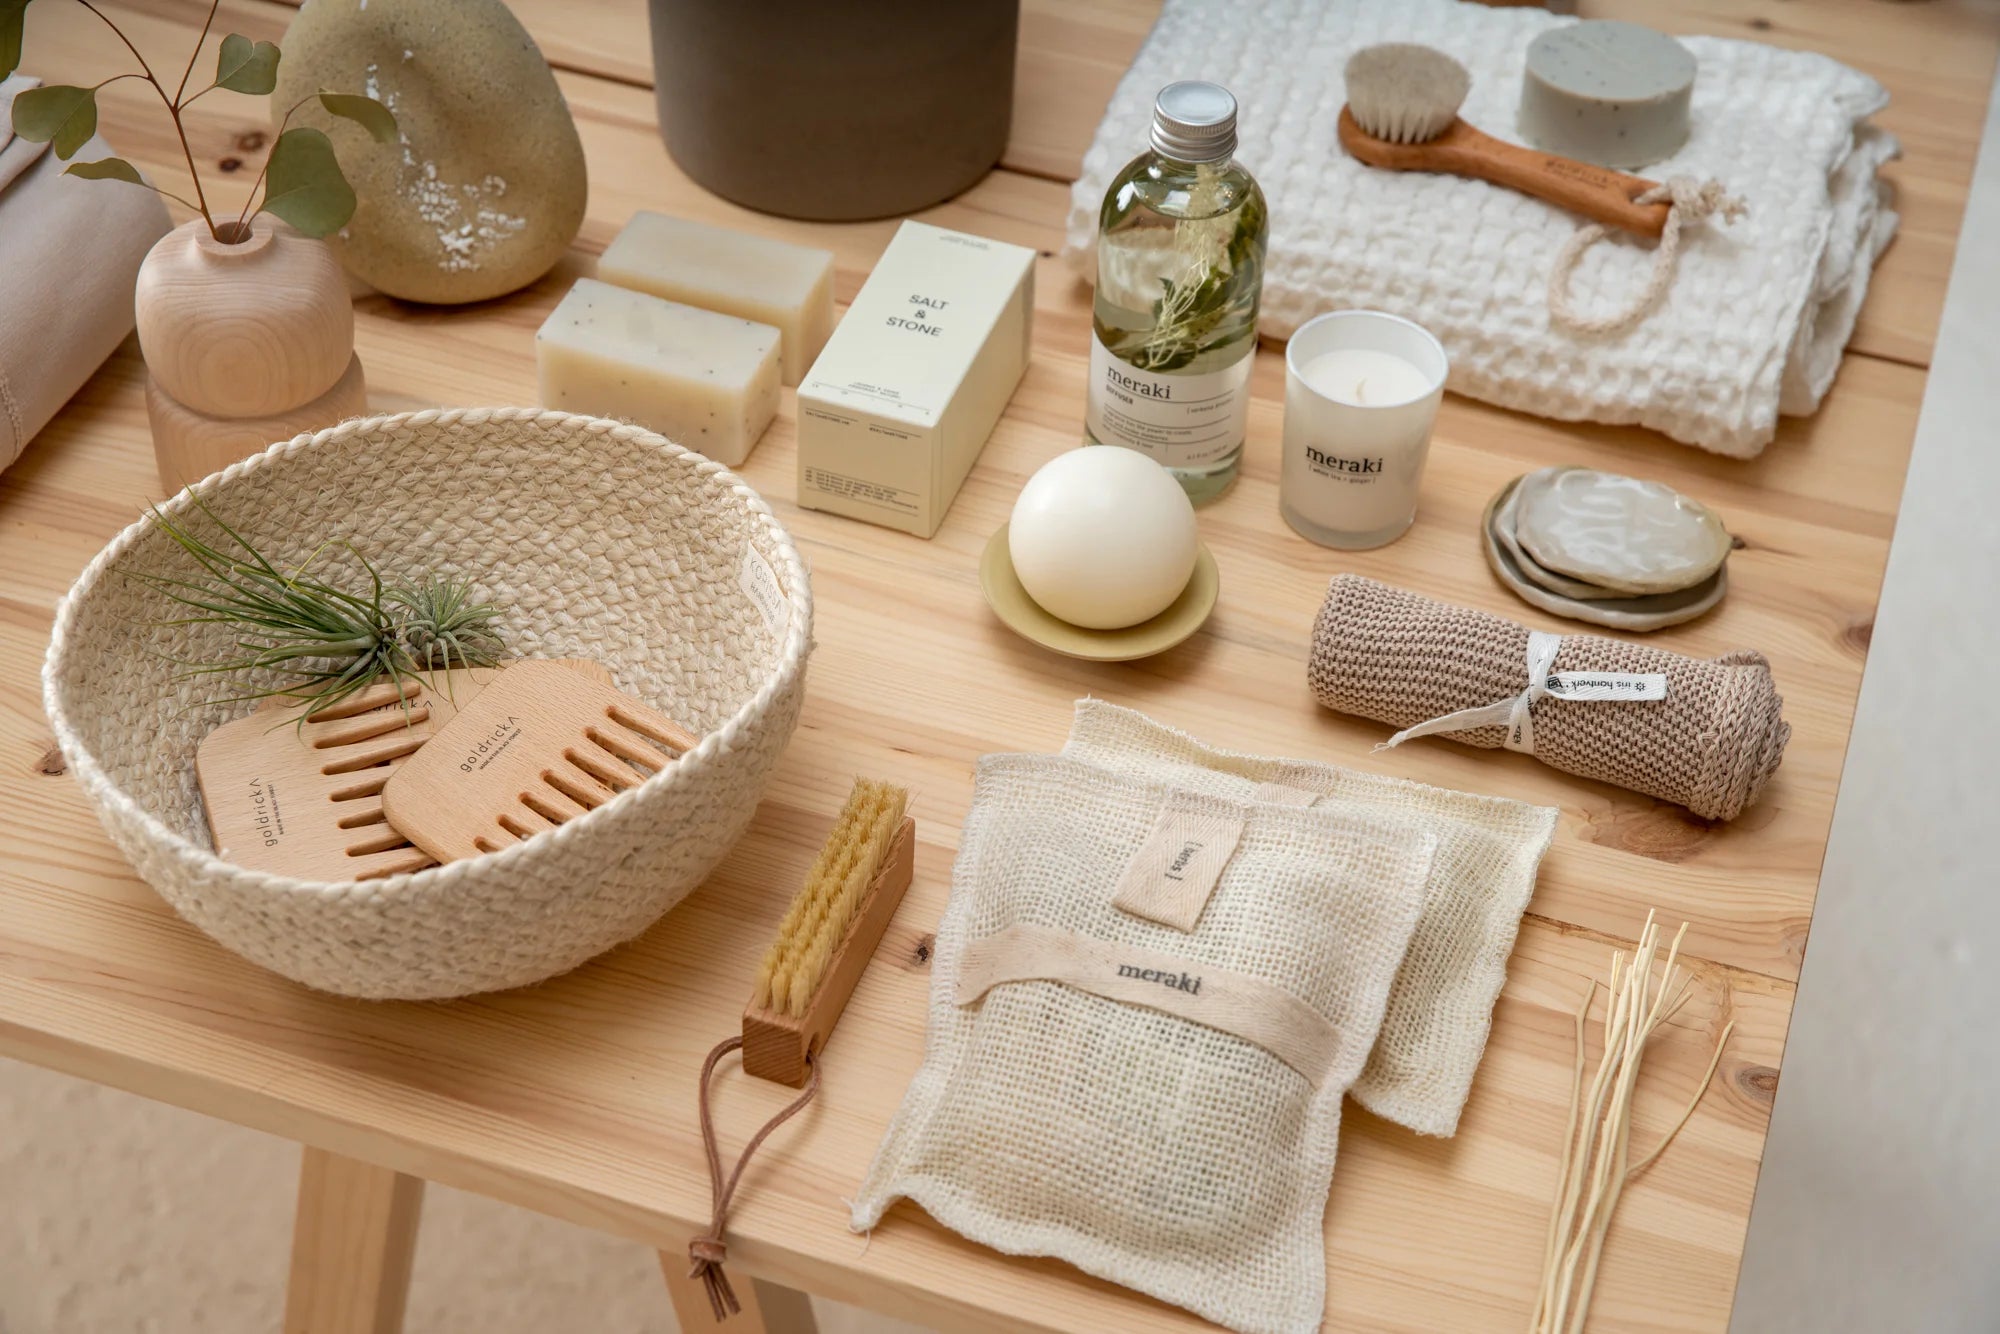 Bath and body goods including combs, candles, body soap, and Meraki products on the wooden surface of a table in the Seattle shop, Woodland Mod.